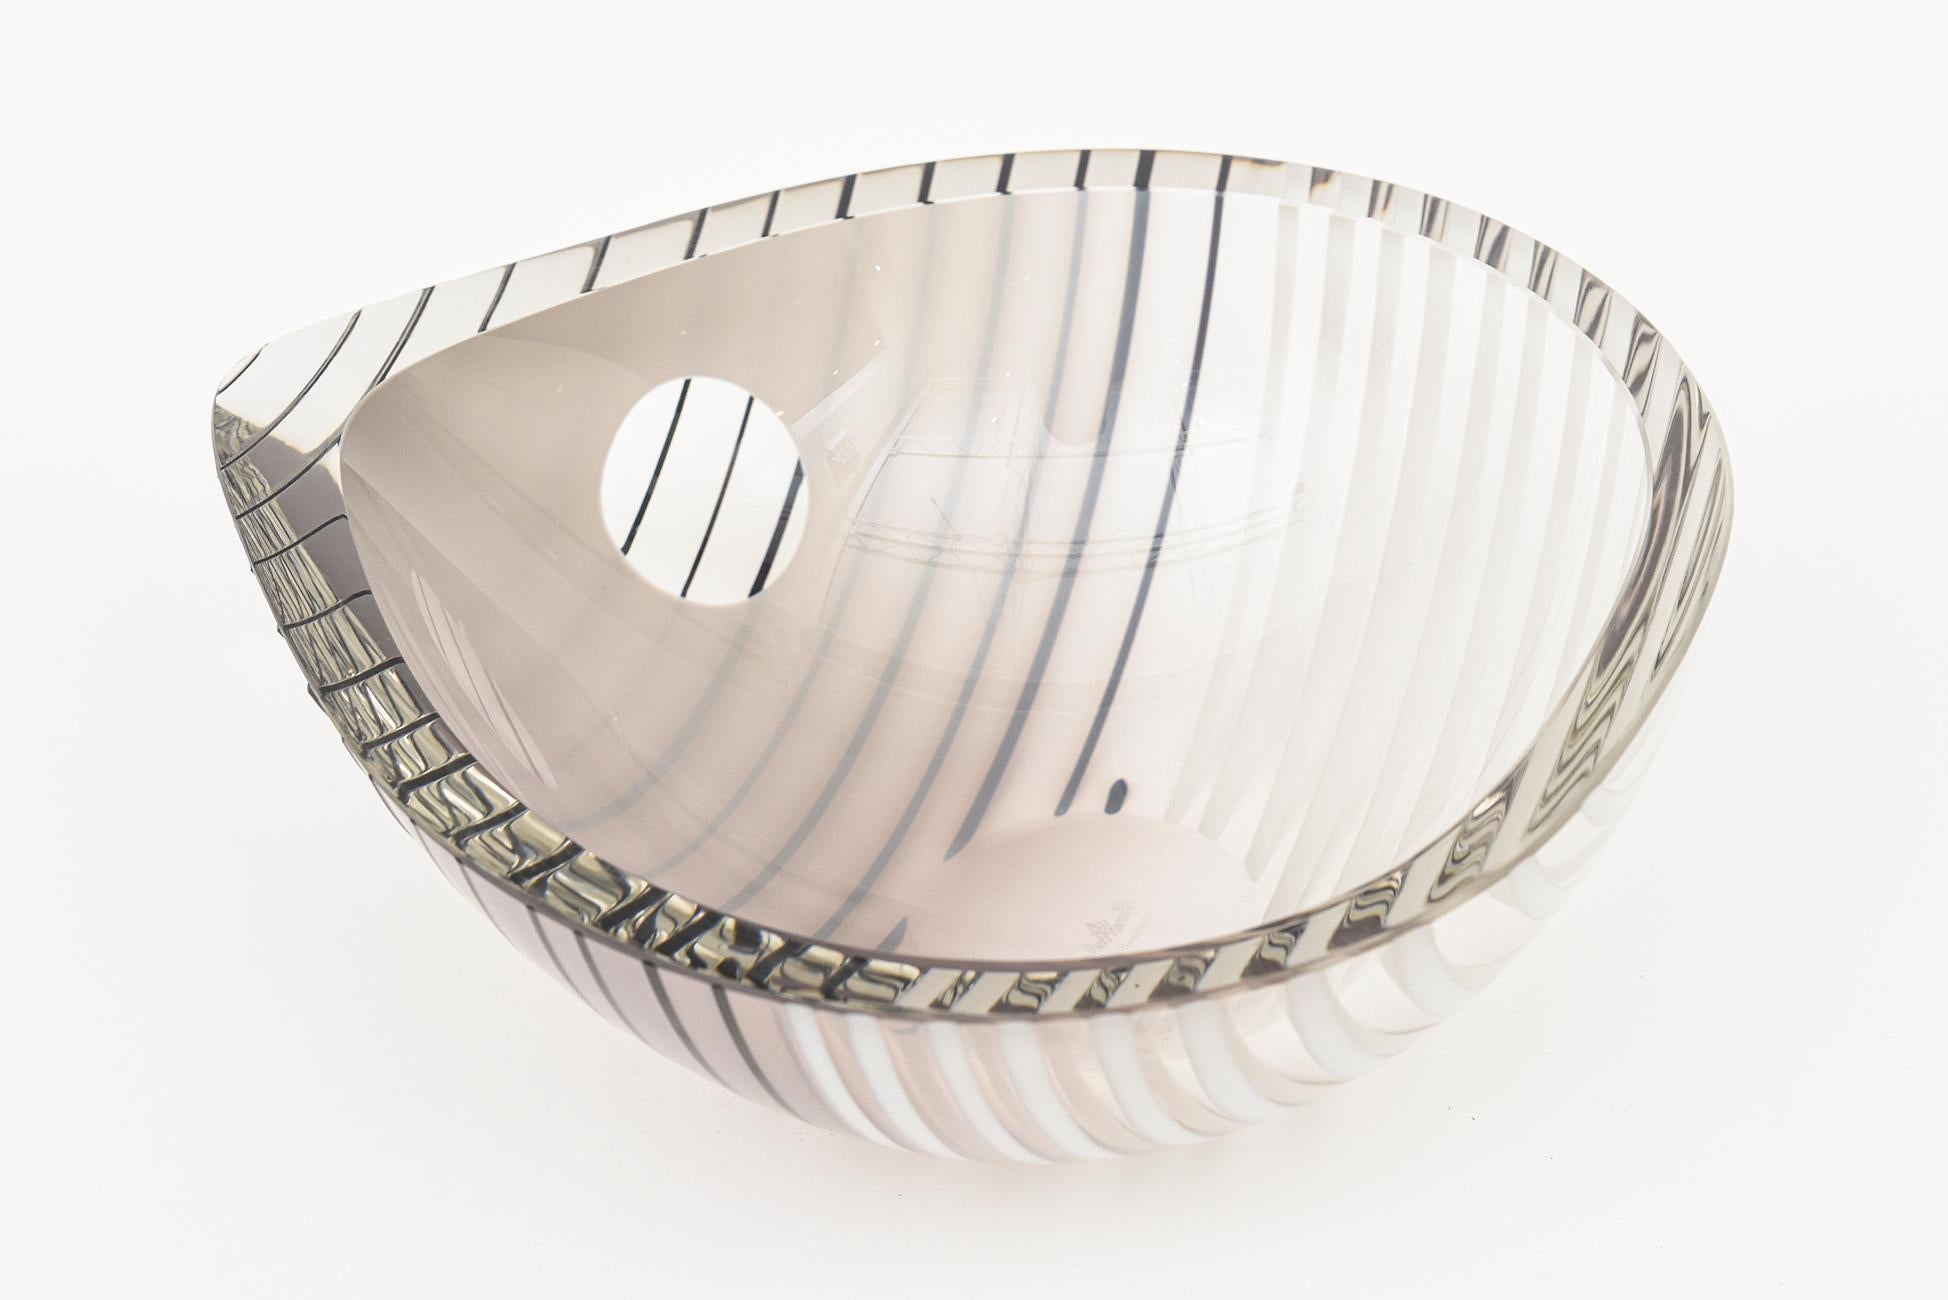 This stunning large almond shaped Italian Murano hand blown glass bowl by Livio Seguso for Rosenthal Studio LIne Germany is from the 80's. It has gradients of the colors of gray, black, light gray, white and clear. The outside is textural with